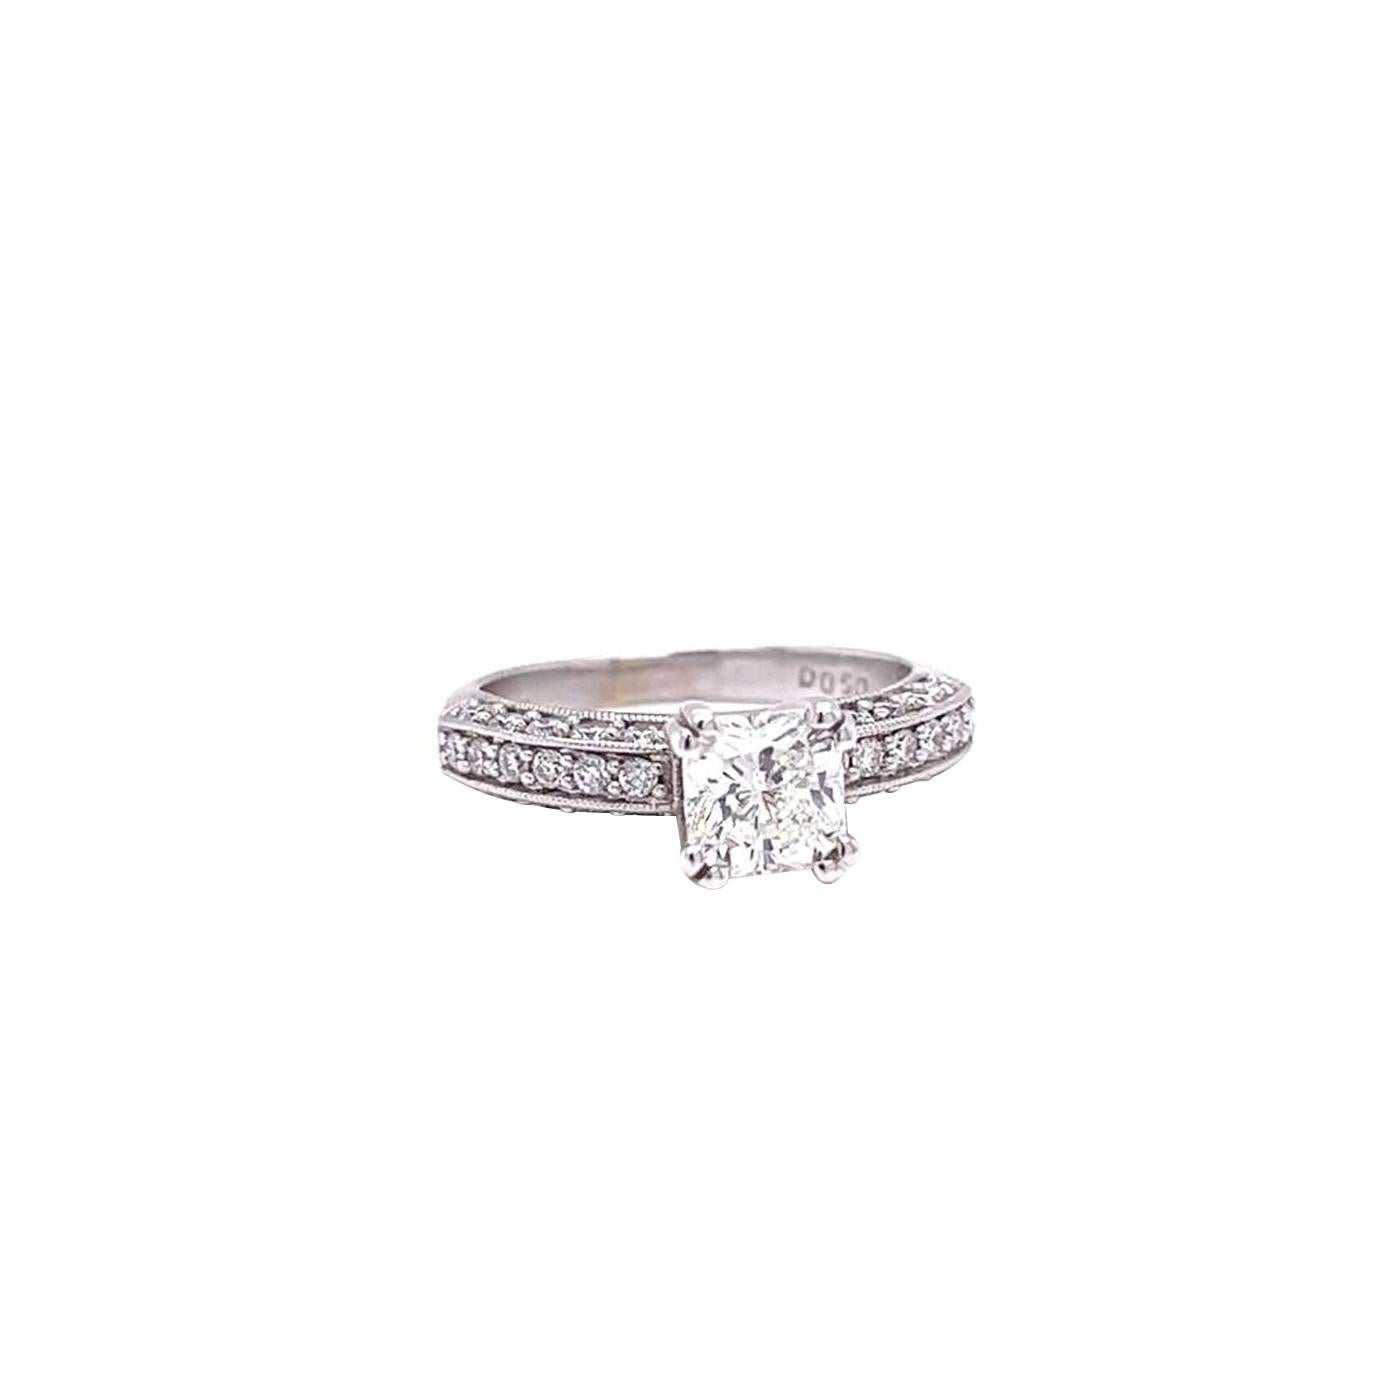 Modernist IGI 2.21ct Natural Radiant Cut Diamond Ring 18K White Gold with Wedding Band For Sale